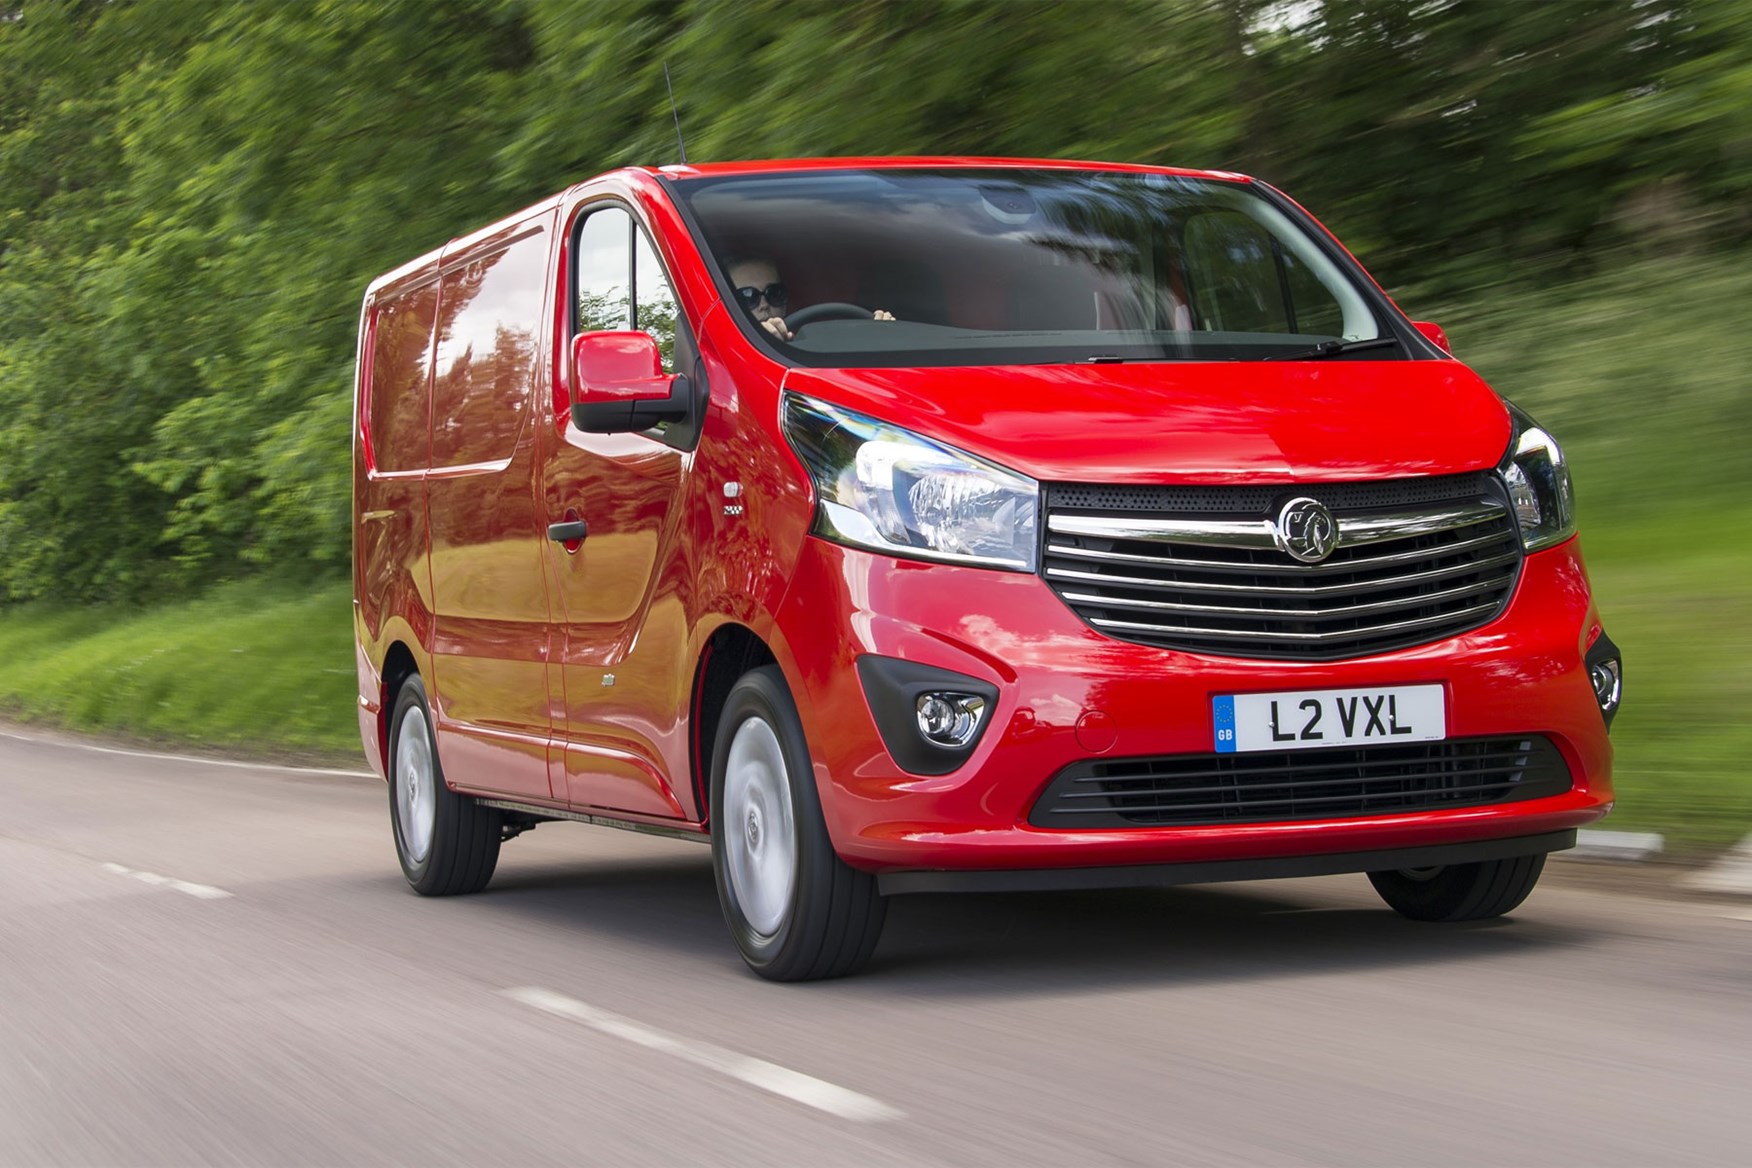 Vauxhall Vivaro review - front view, red, driving